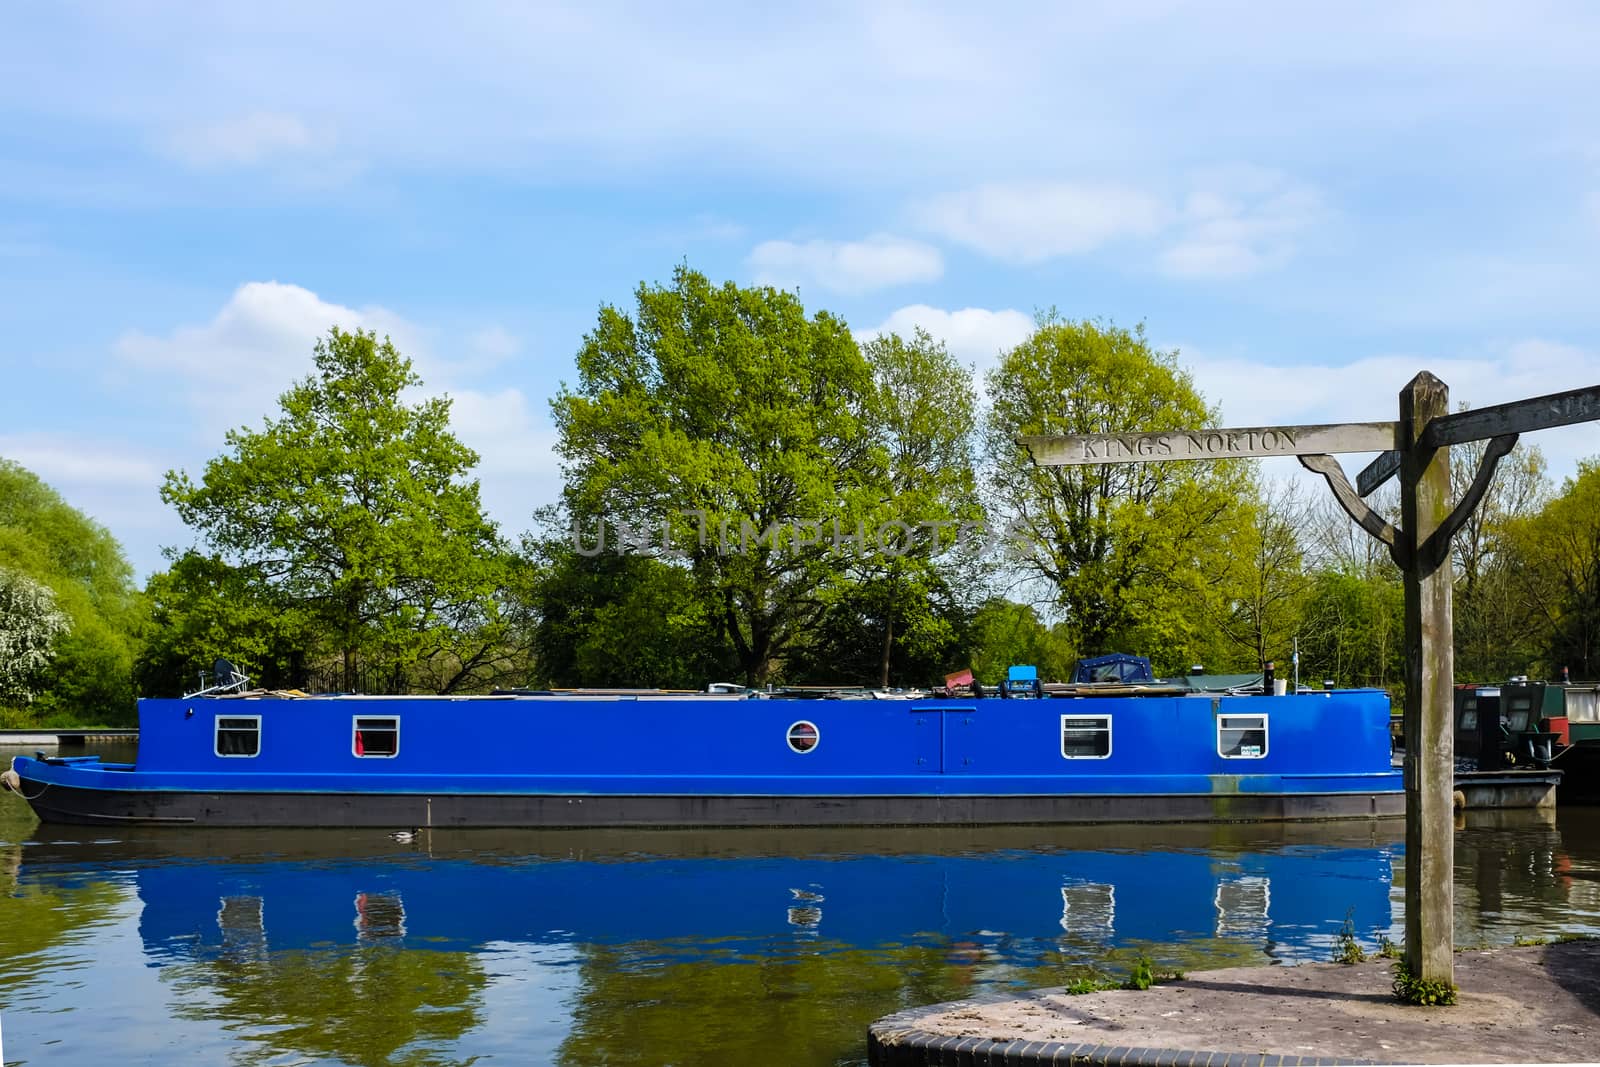 Blue British canal boat parked in a dock at Lapworth, a Warwickshire village.